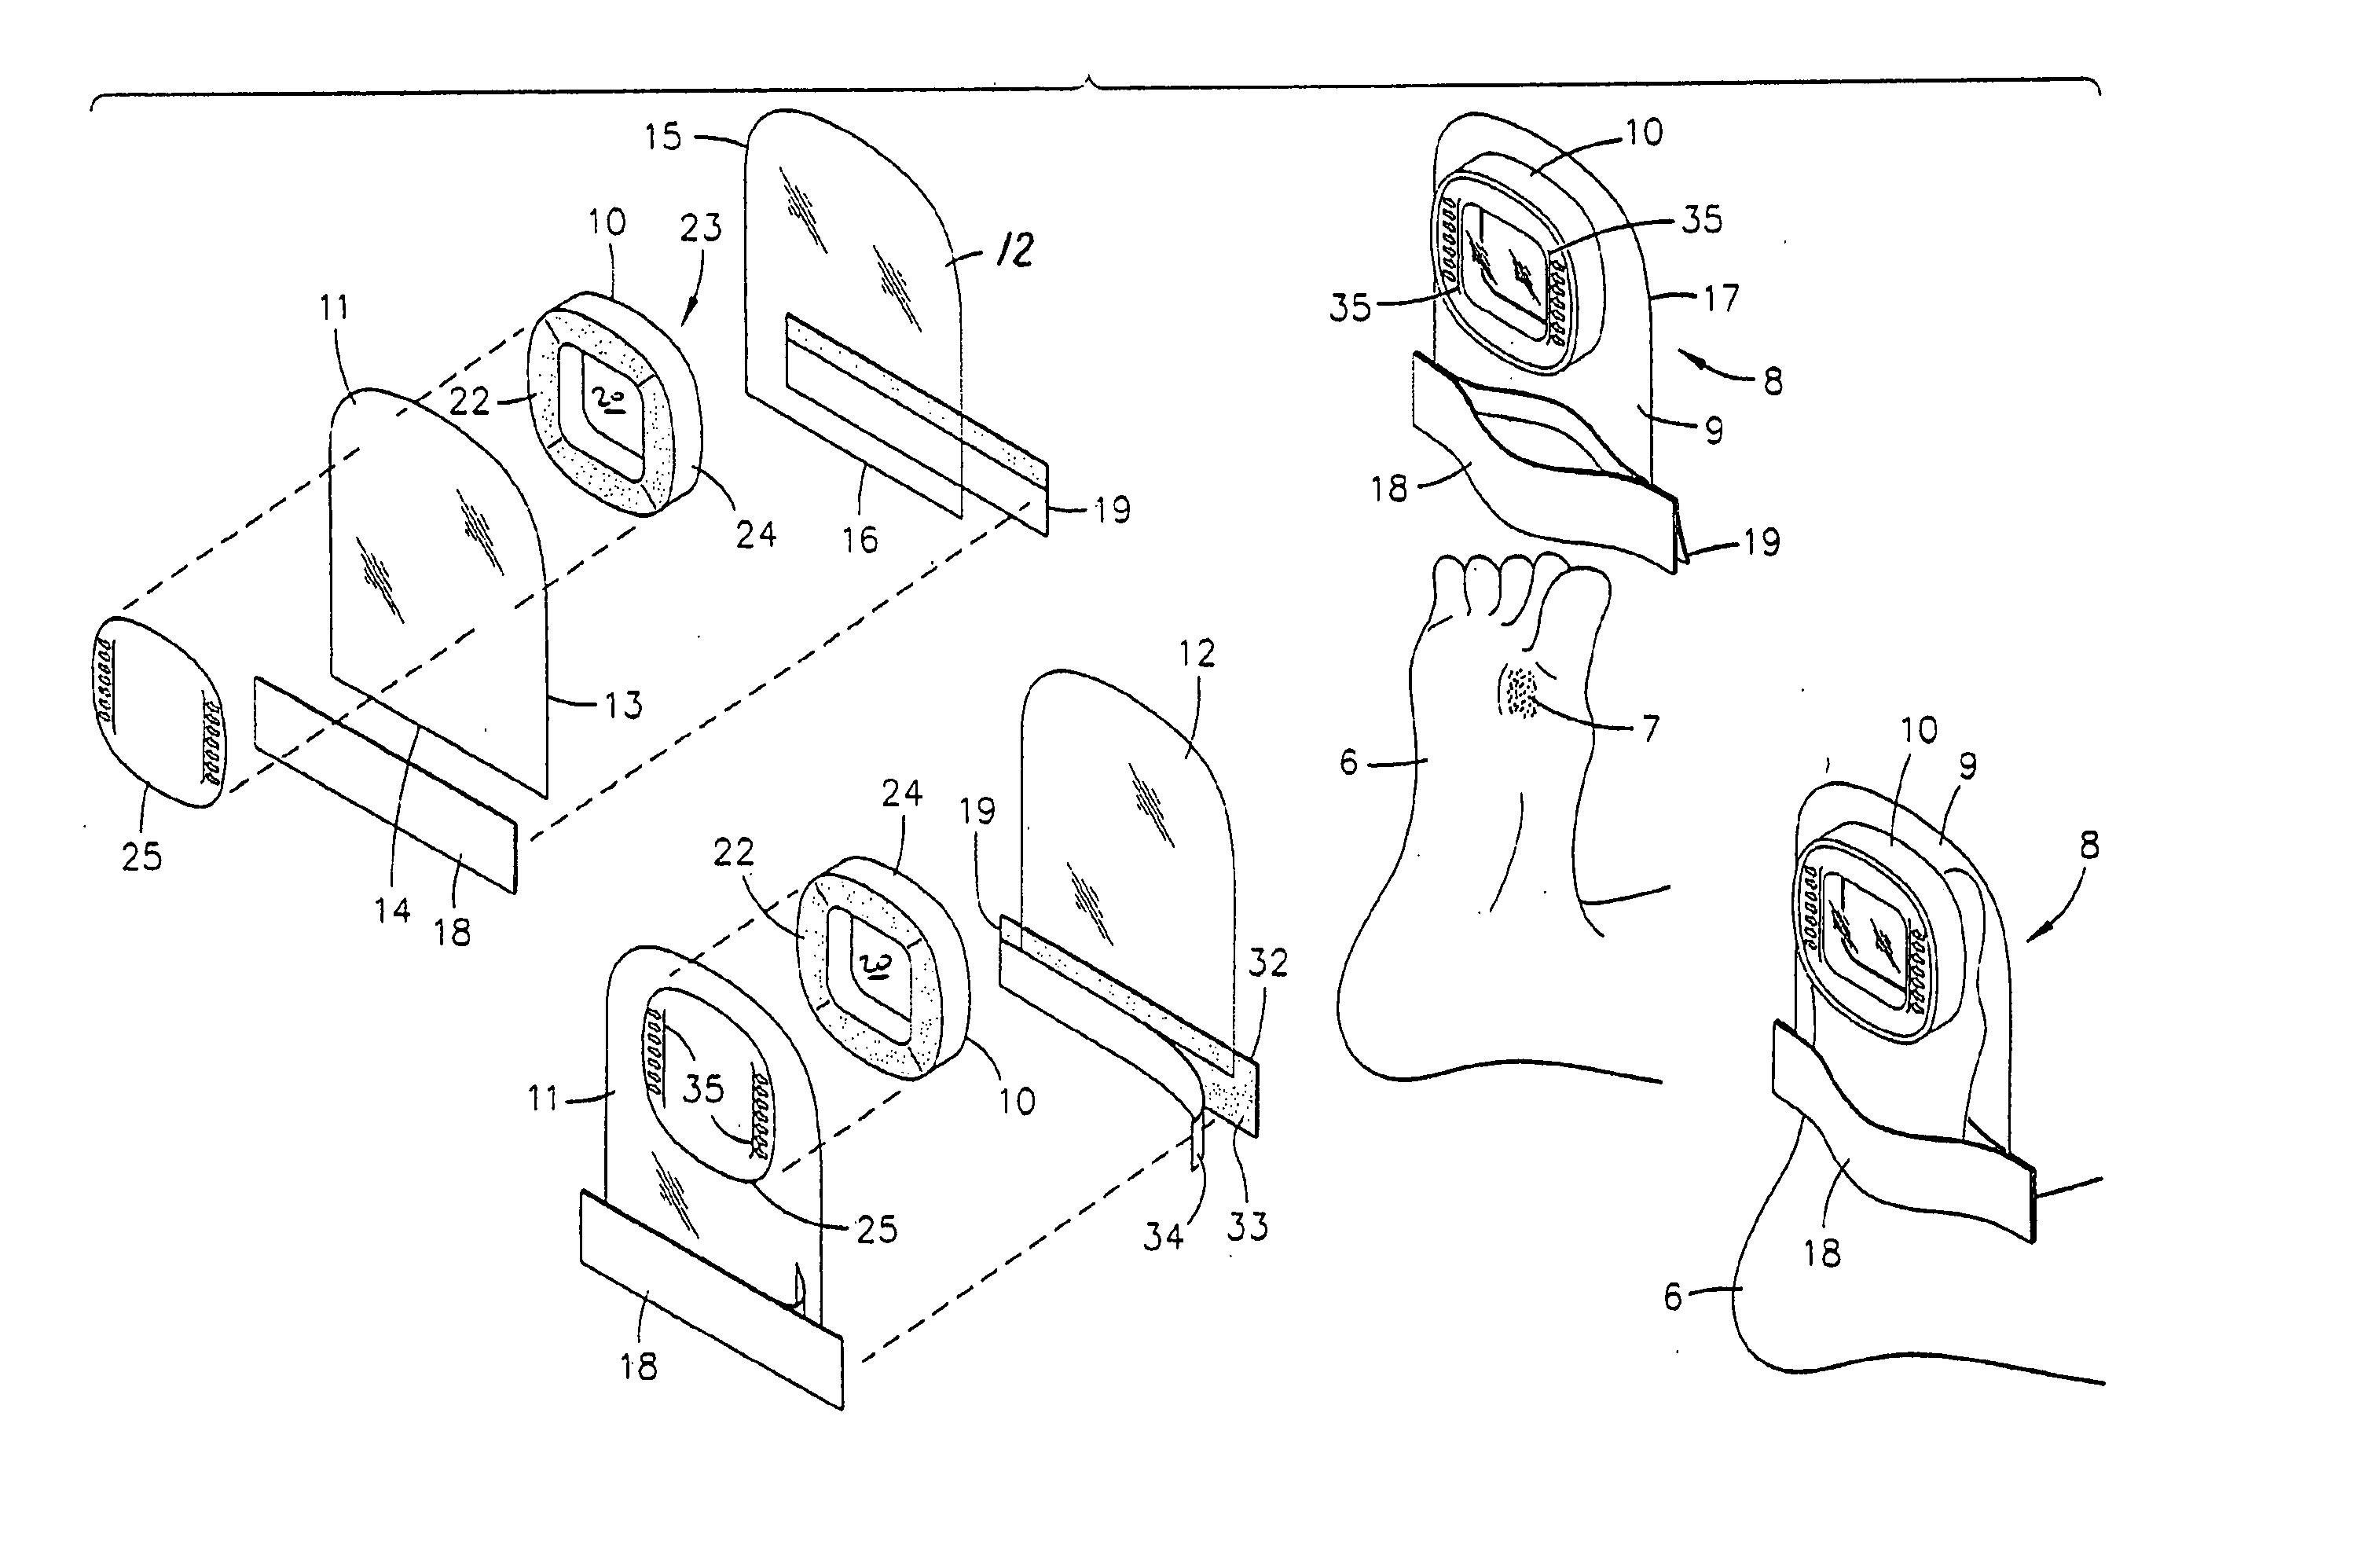 Tissue treatment device for an extremity